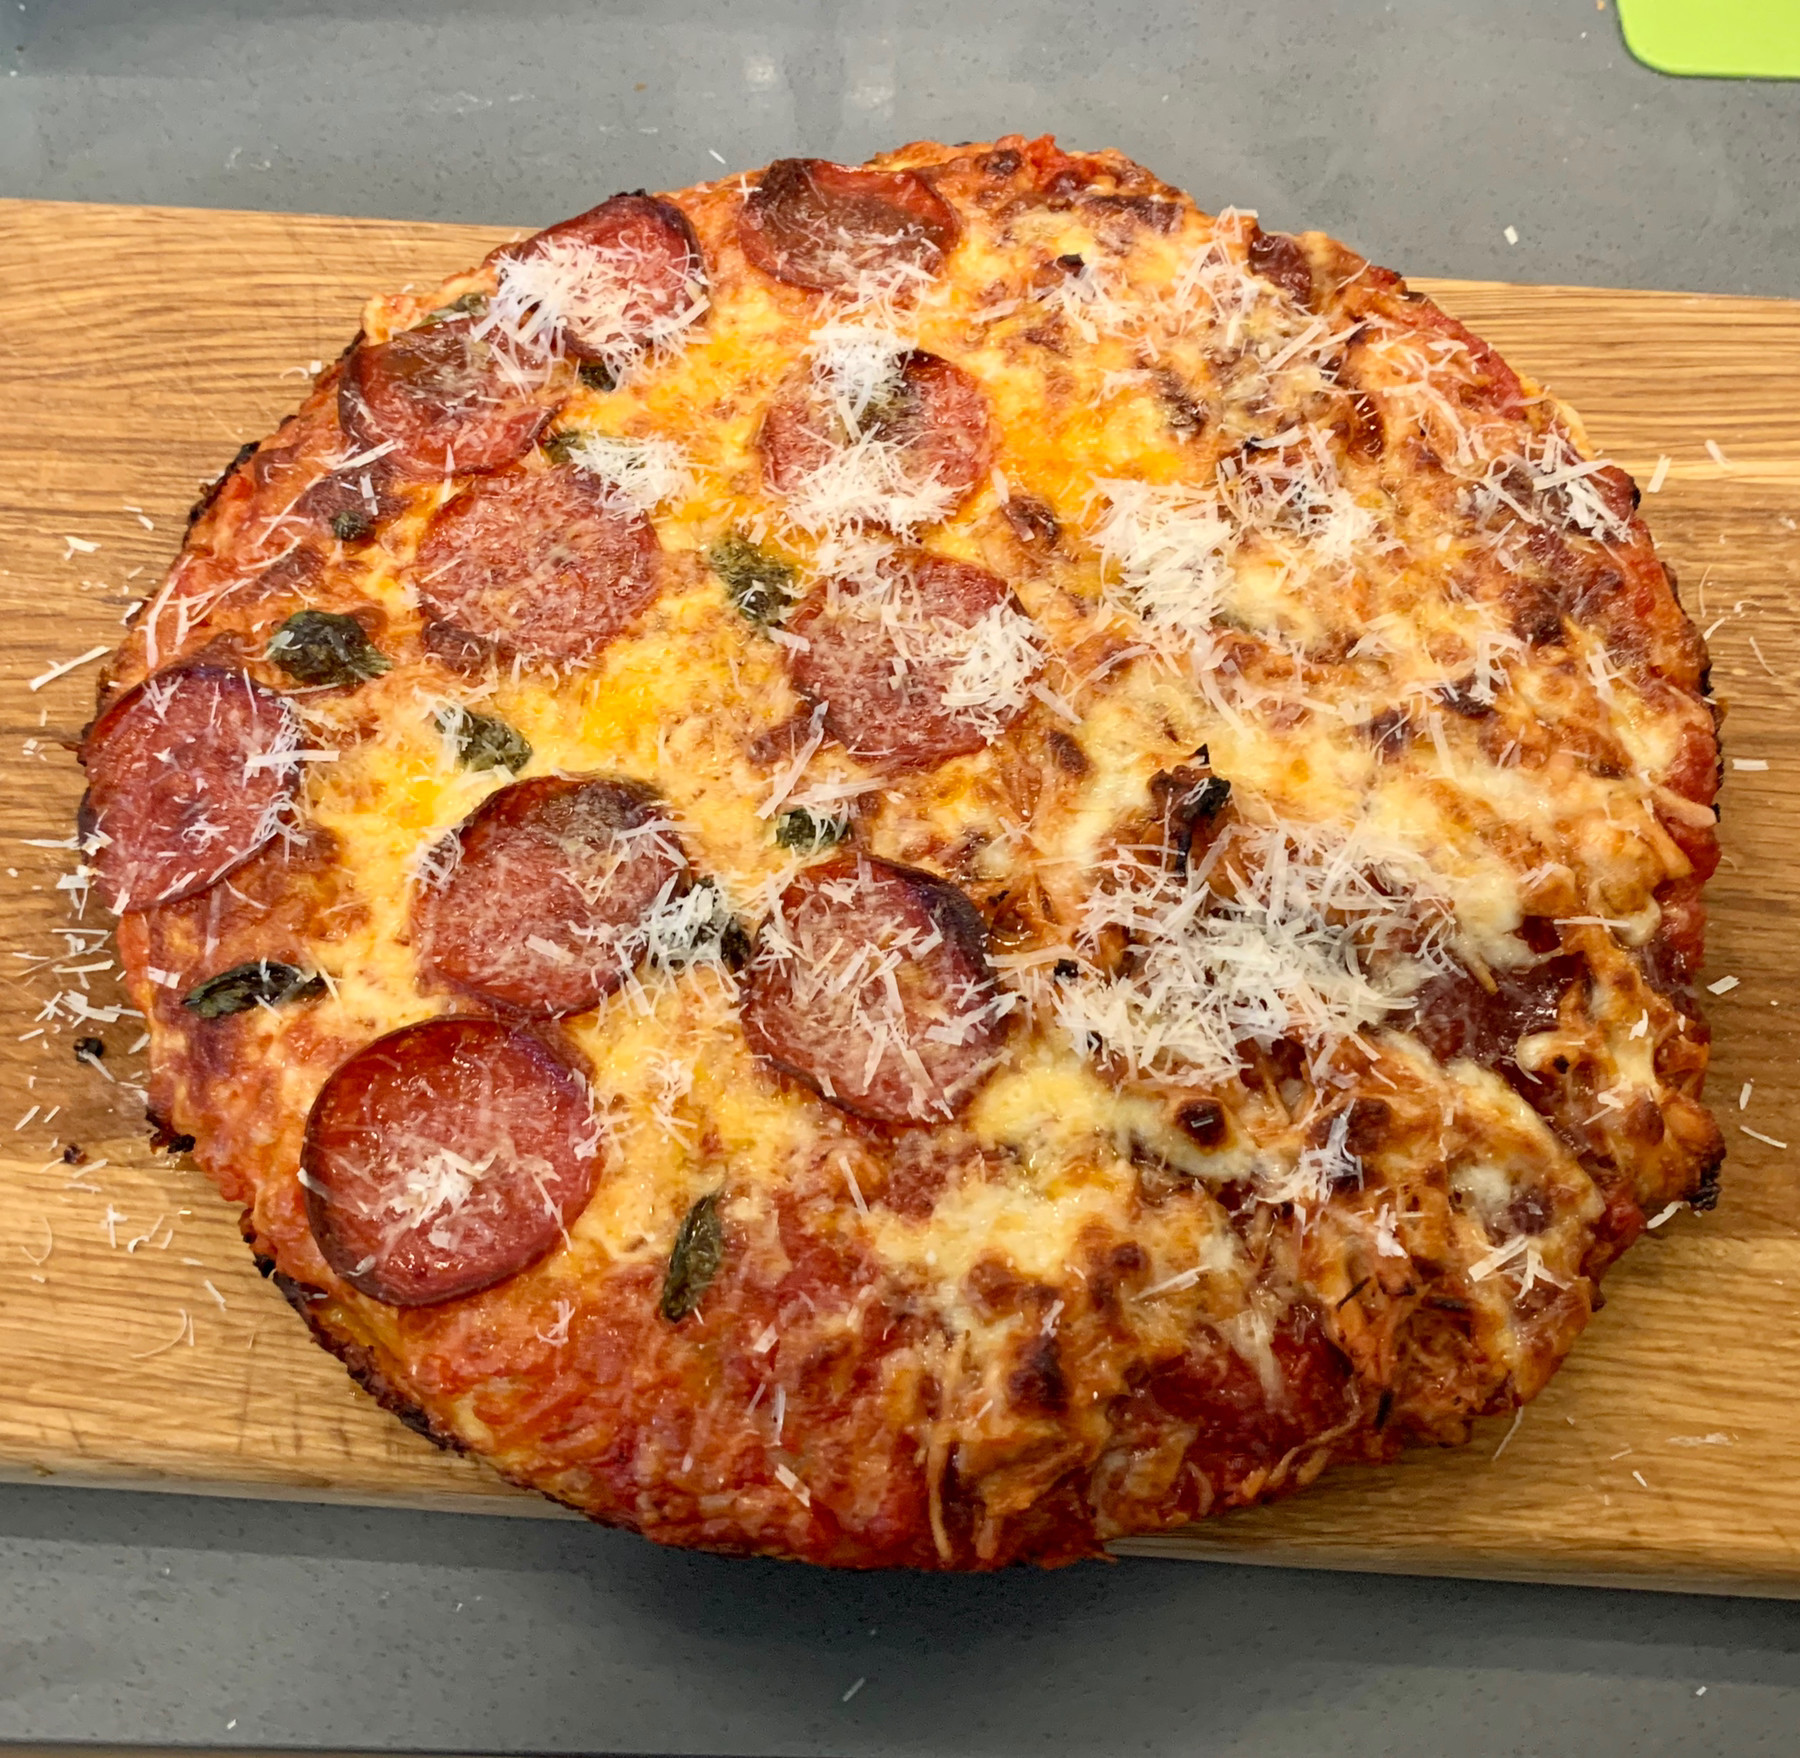 A whole pan pizza